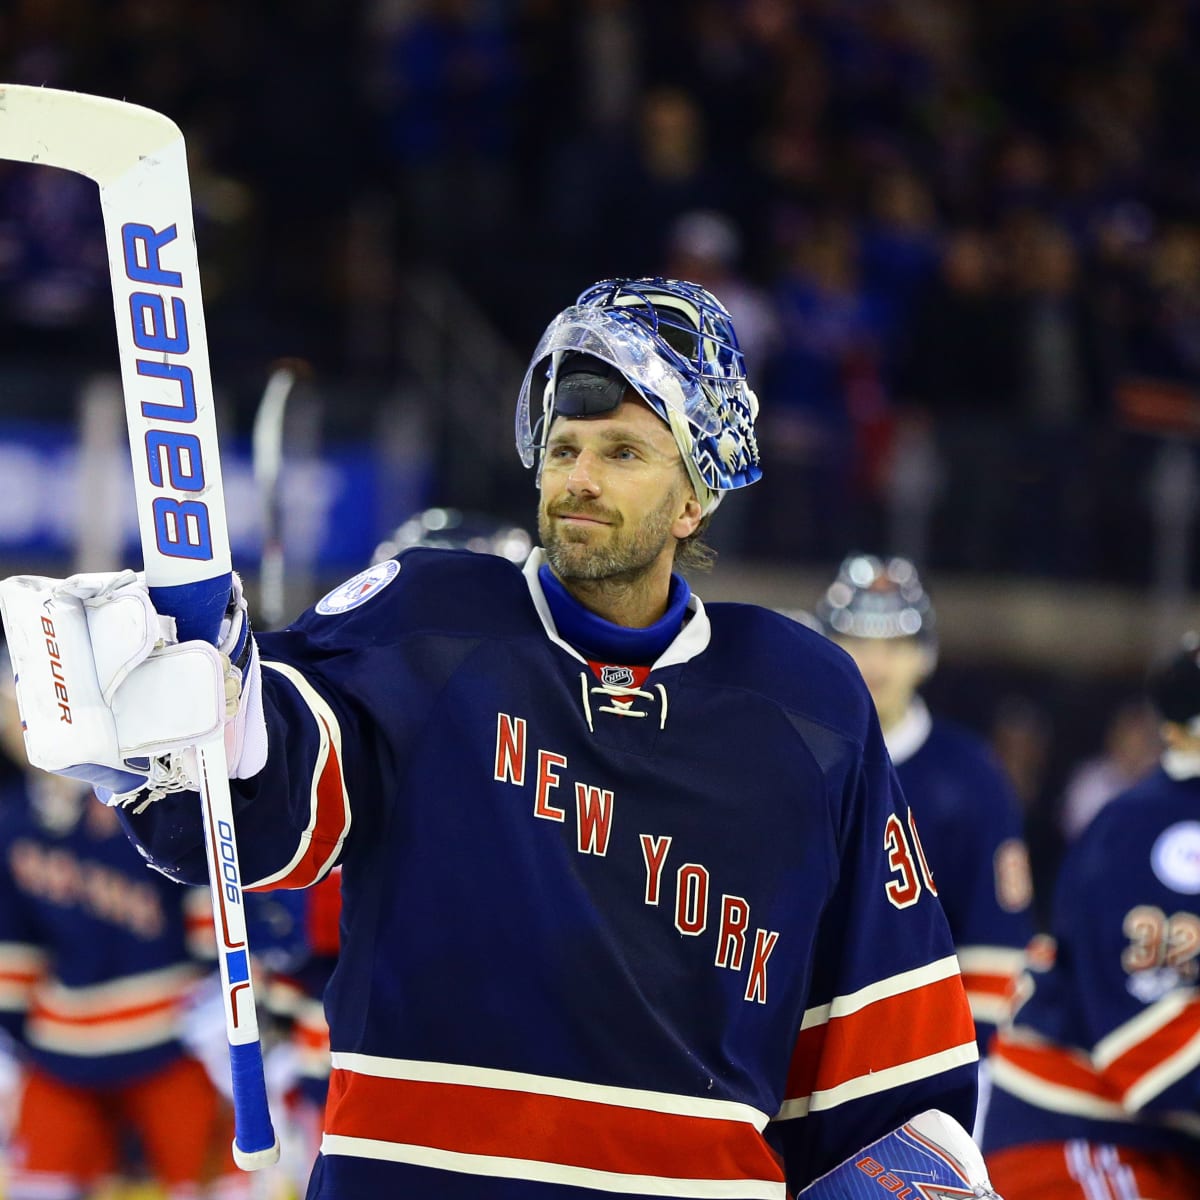 Henrik Lundqvist expected to headline Hockey's Hall of Fame class of 2023  in first year of eligibility